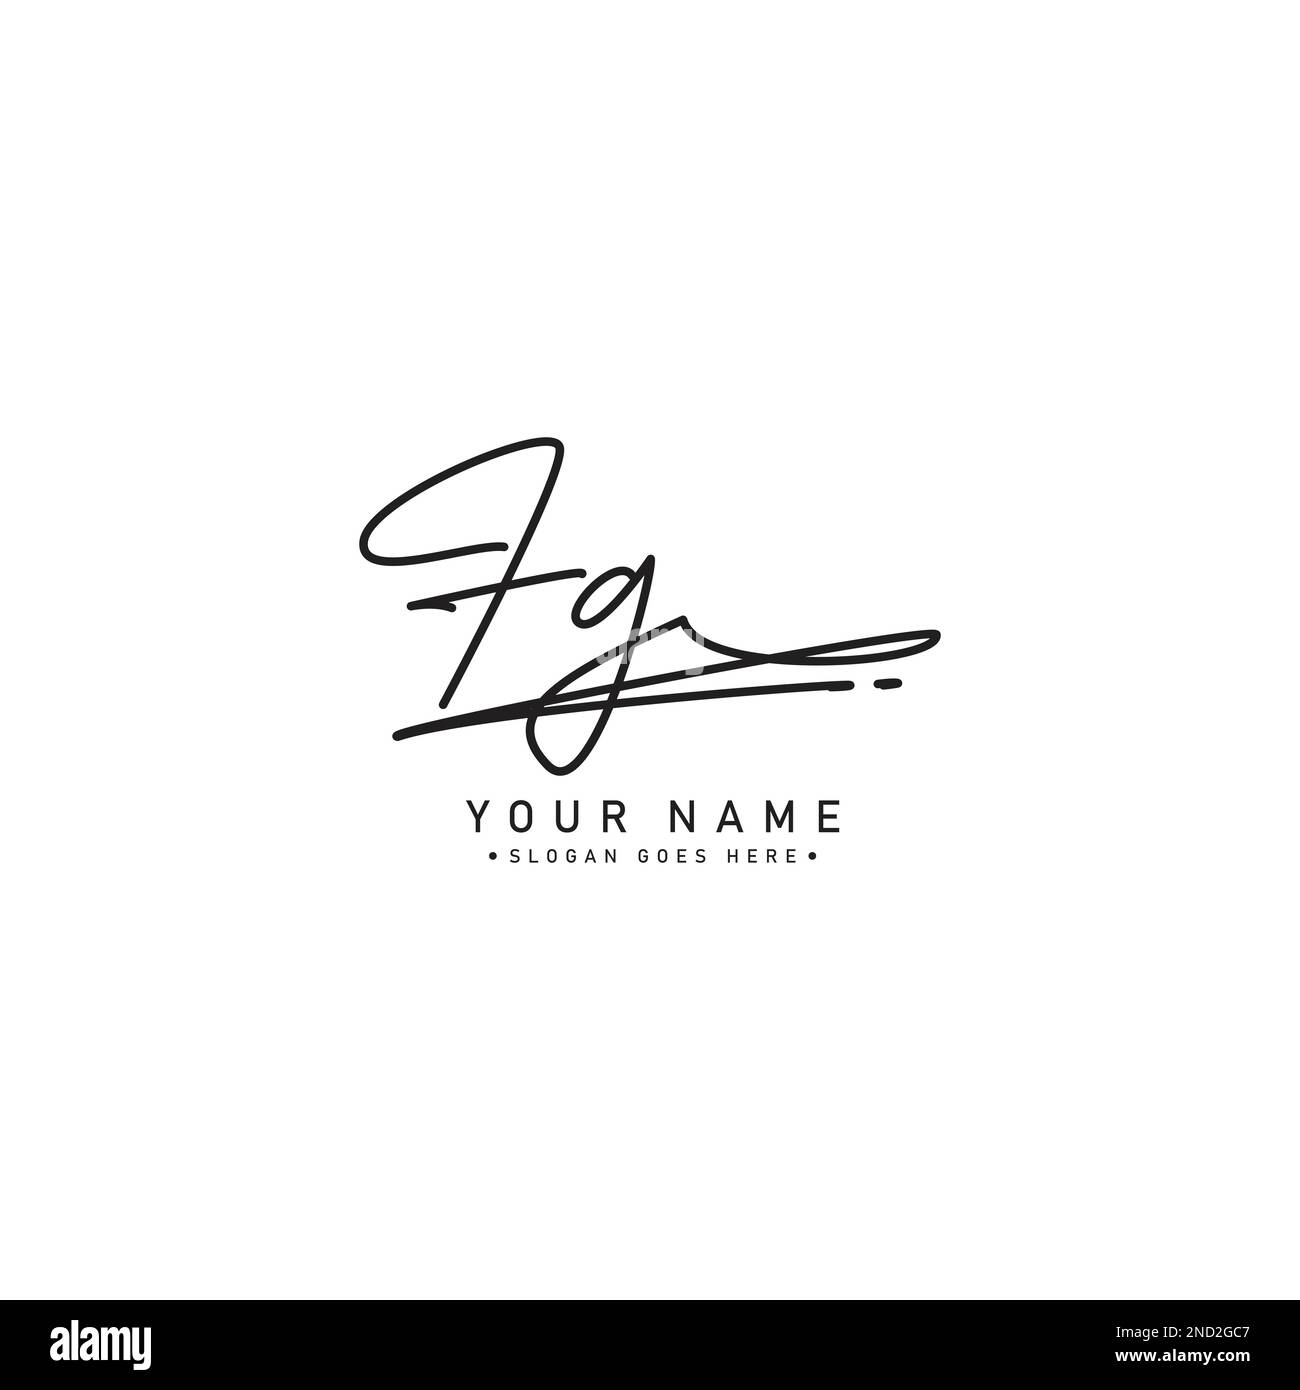 FG Handwritten Signature logo - Vector Logo Template for Beauty, Fashion and Photography Business Stock Vector